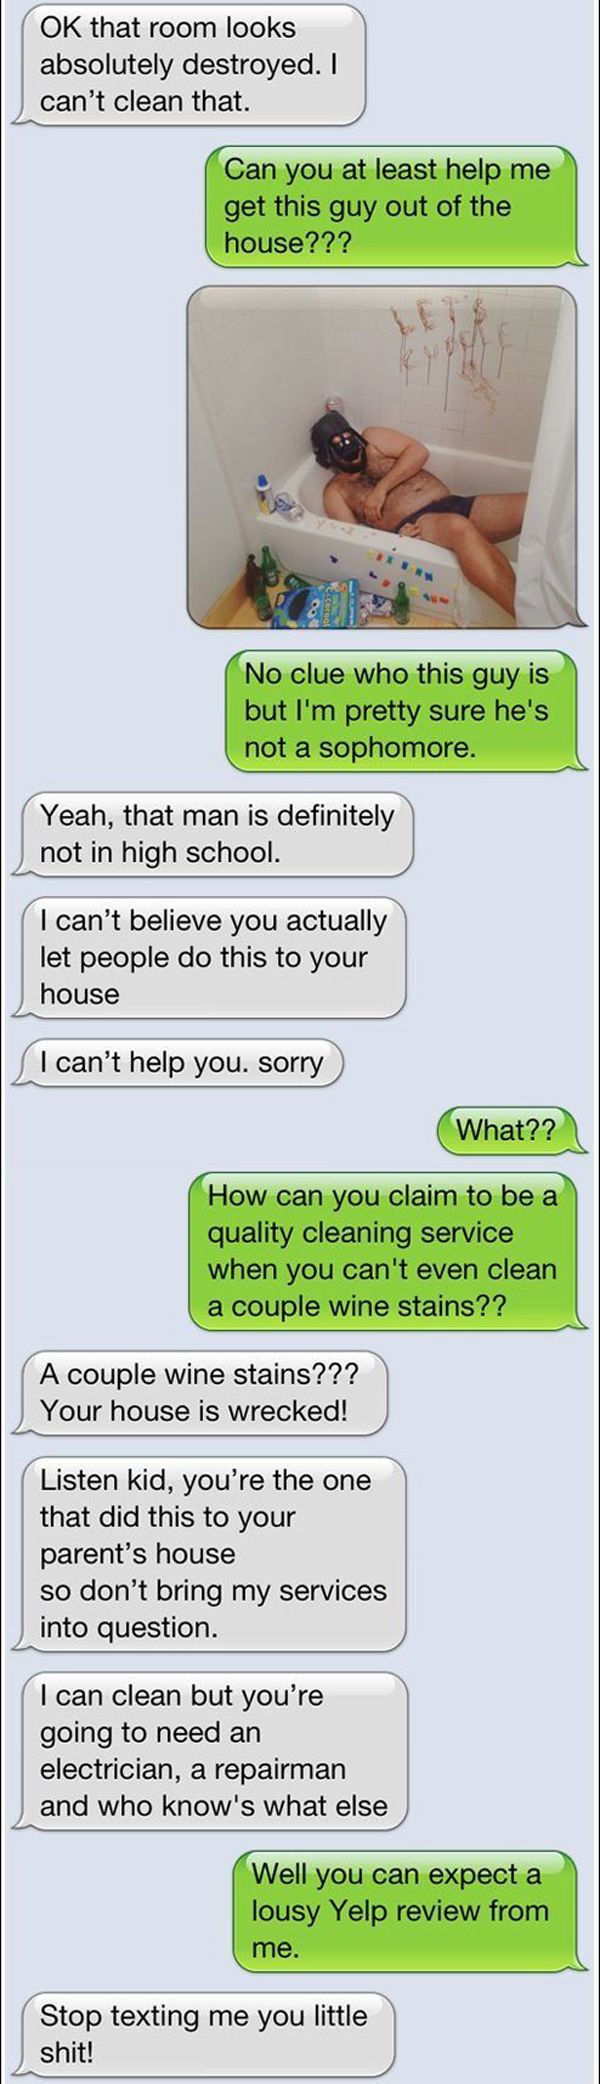 funny text message prank